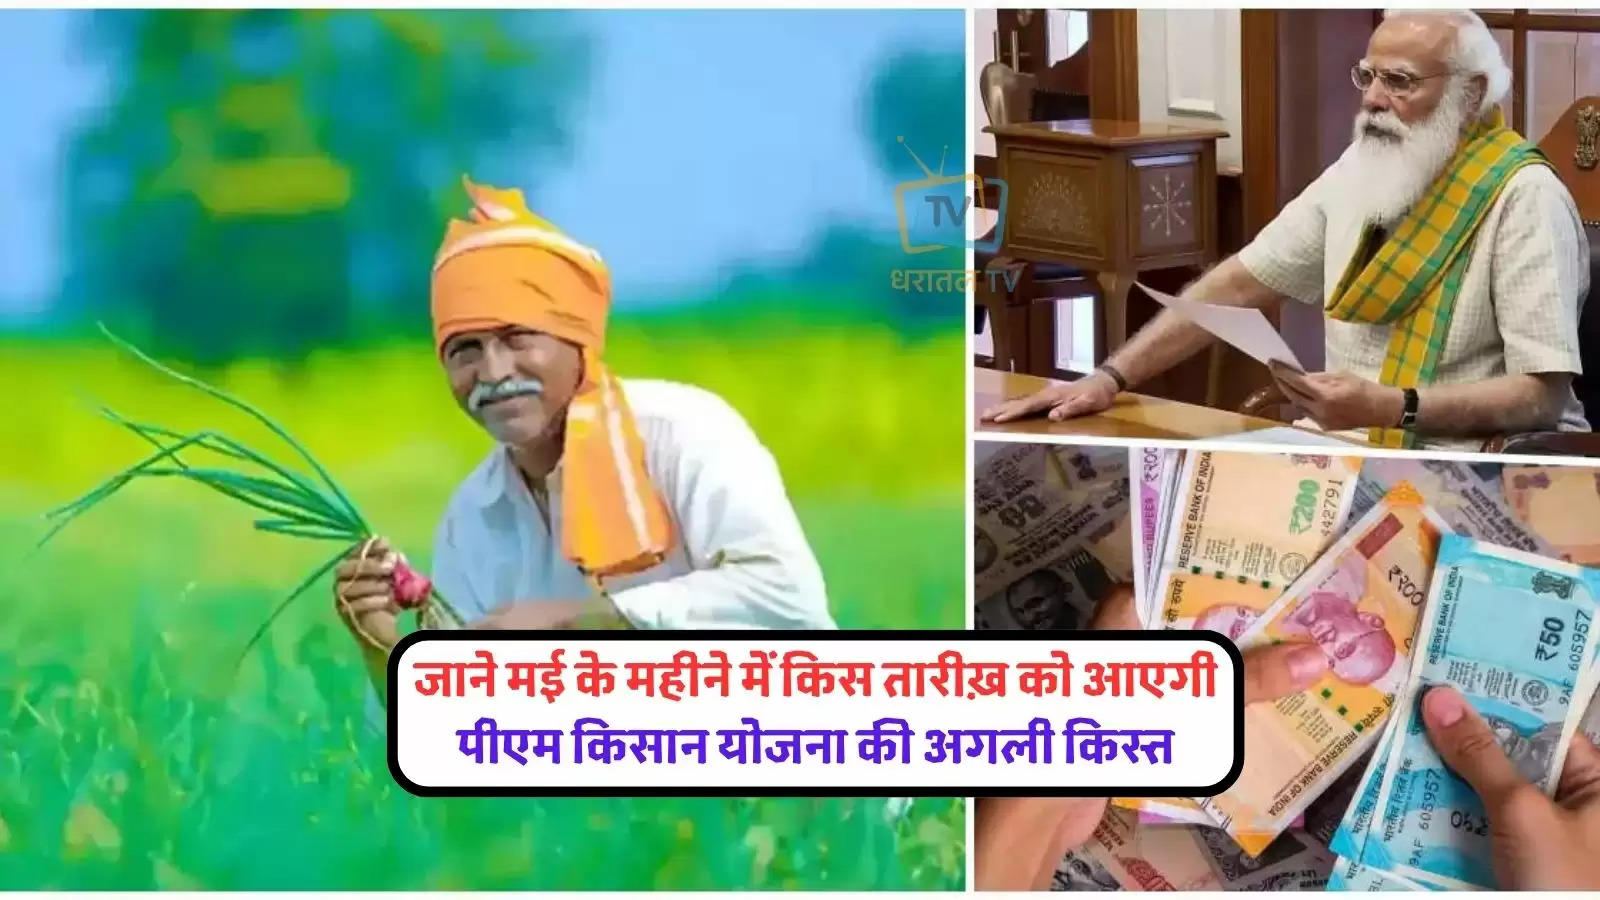 pm-kisan-yojana-14th-installment-will-issue-on-this-date-in-may-know-details